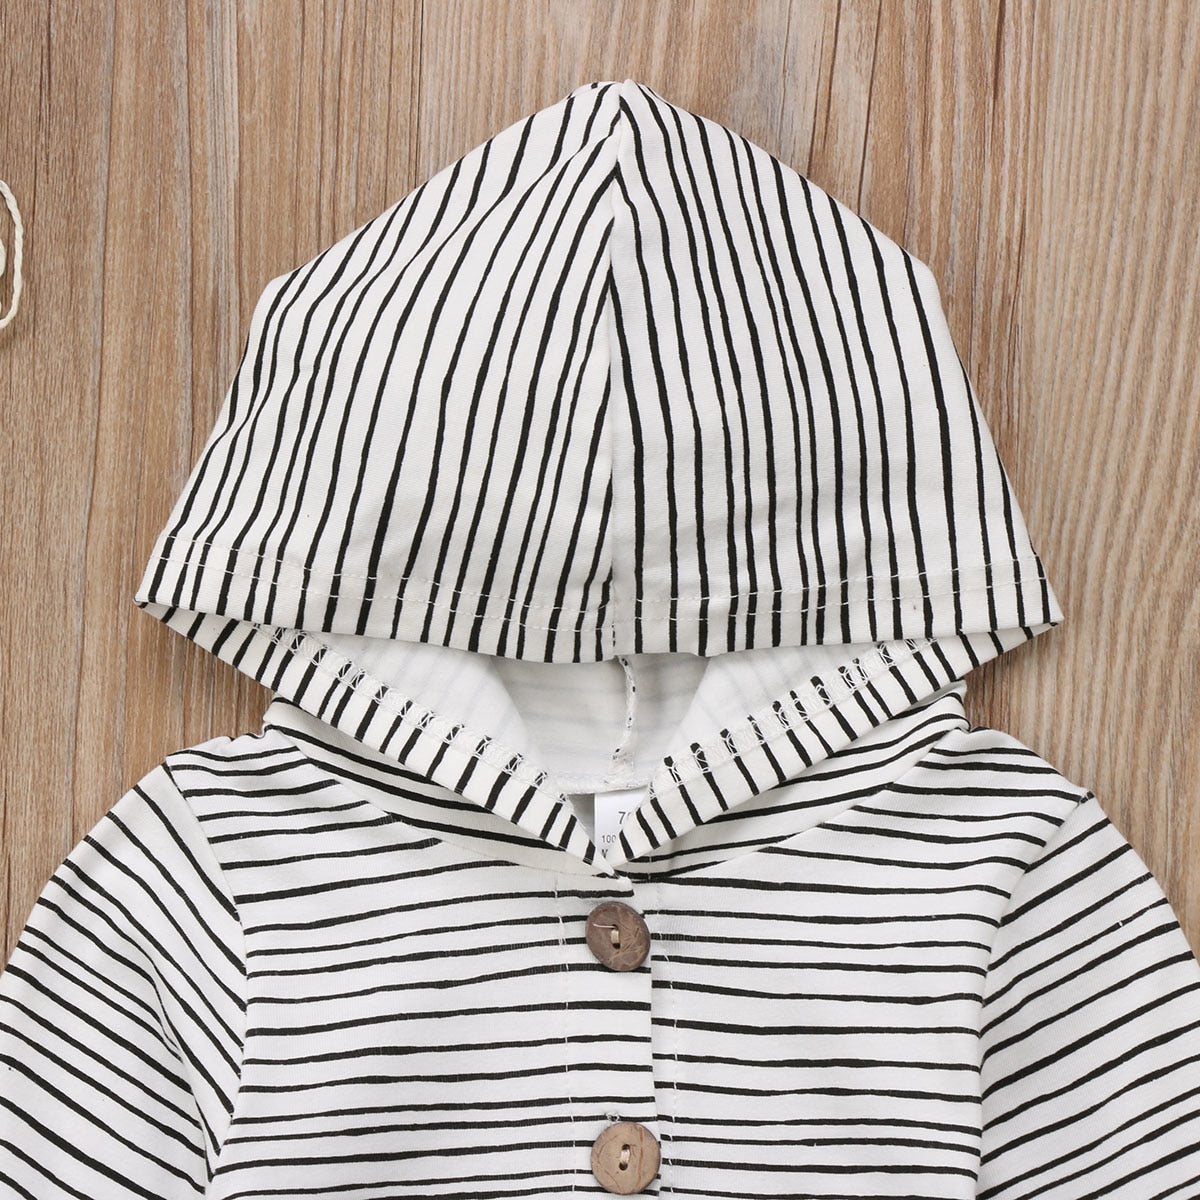 Winter Striped Baby Boy Girl Warm Infant Romper Jumpsuit Long Sleeve Hooded Clothes Sweater Outfit - ebowsos